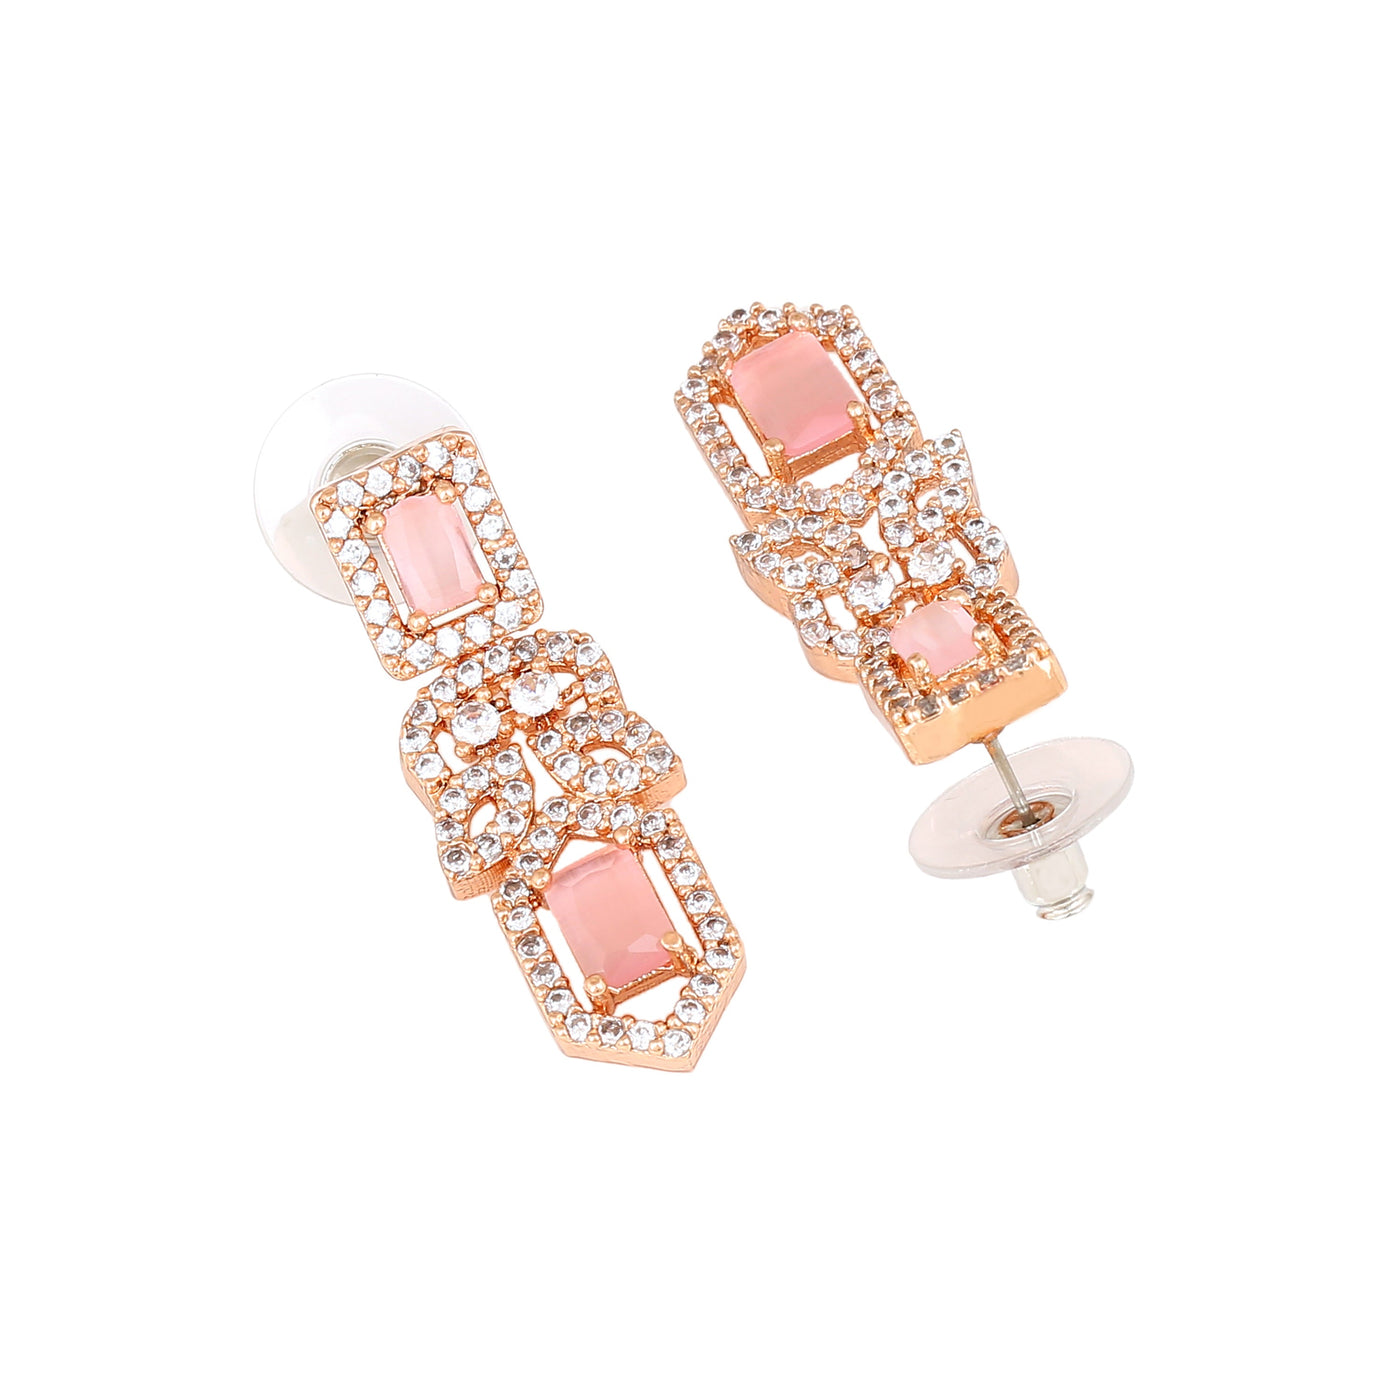 Estele Rose Gold Plated CZ Fascinating Designer Earrings with Mint Pink Crystals for Women